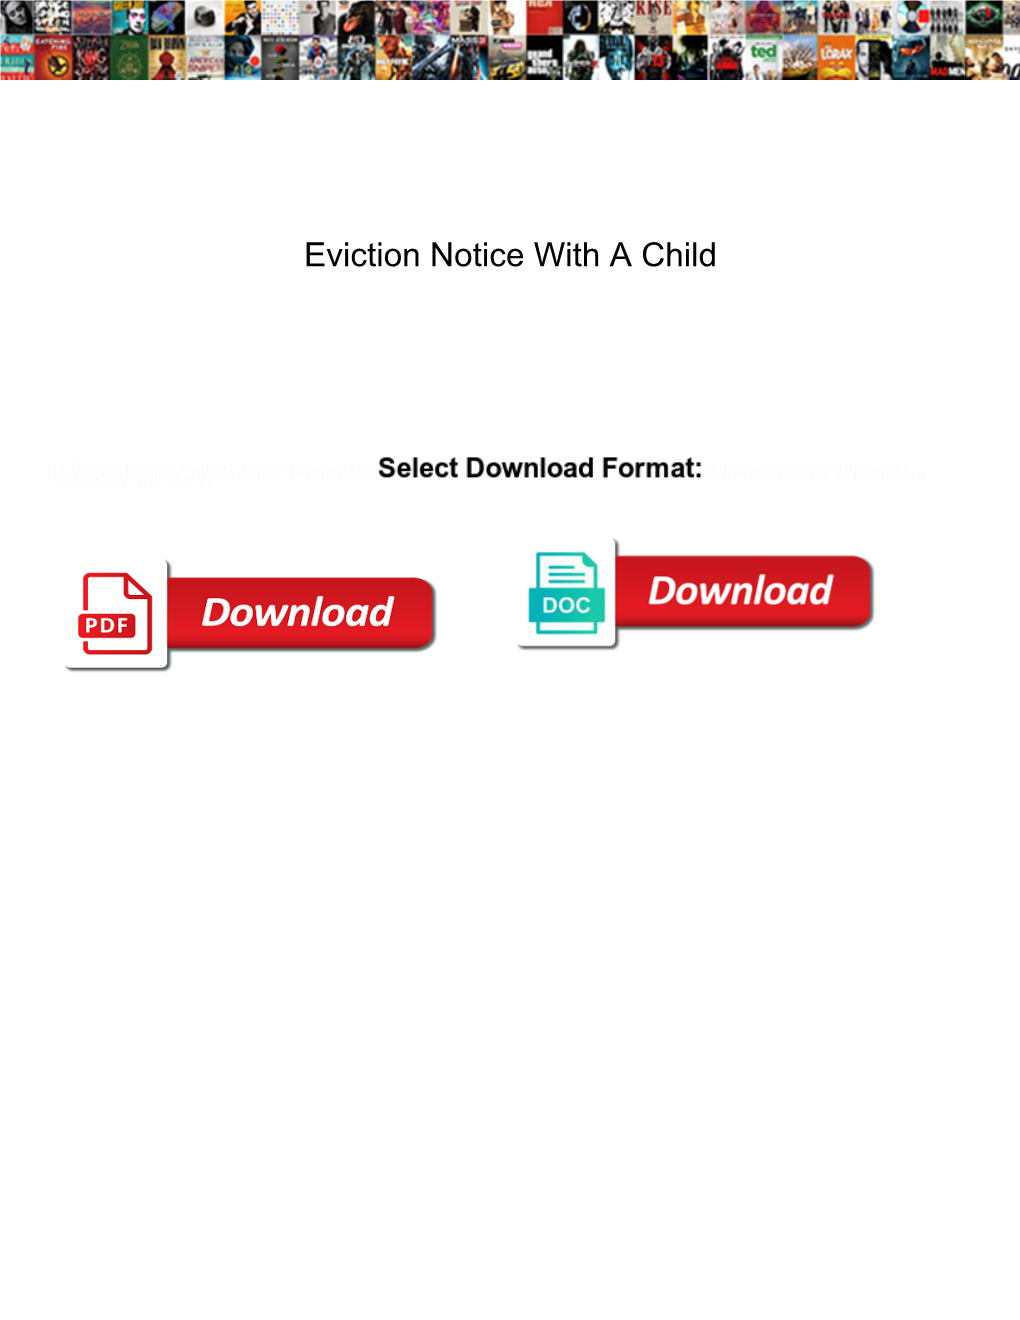 Eviction Notice with a Child